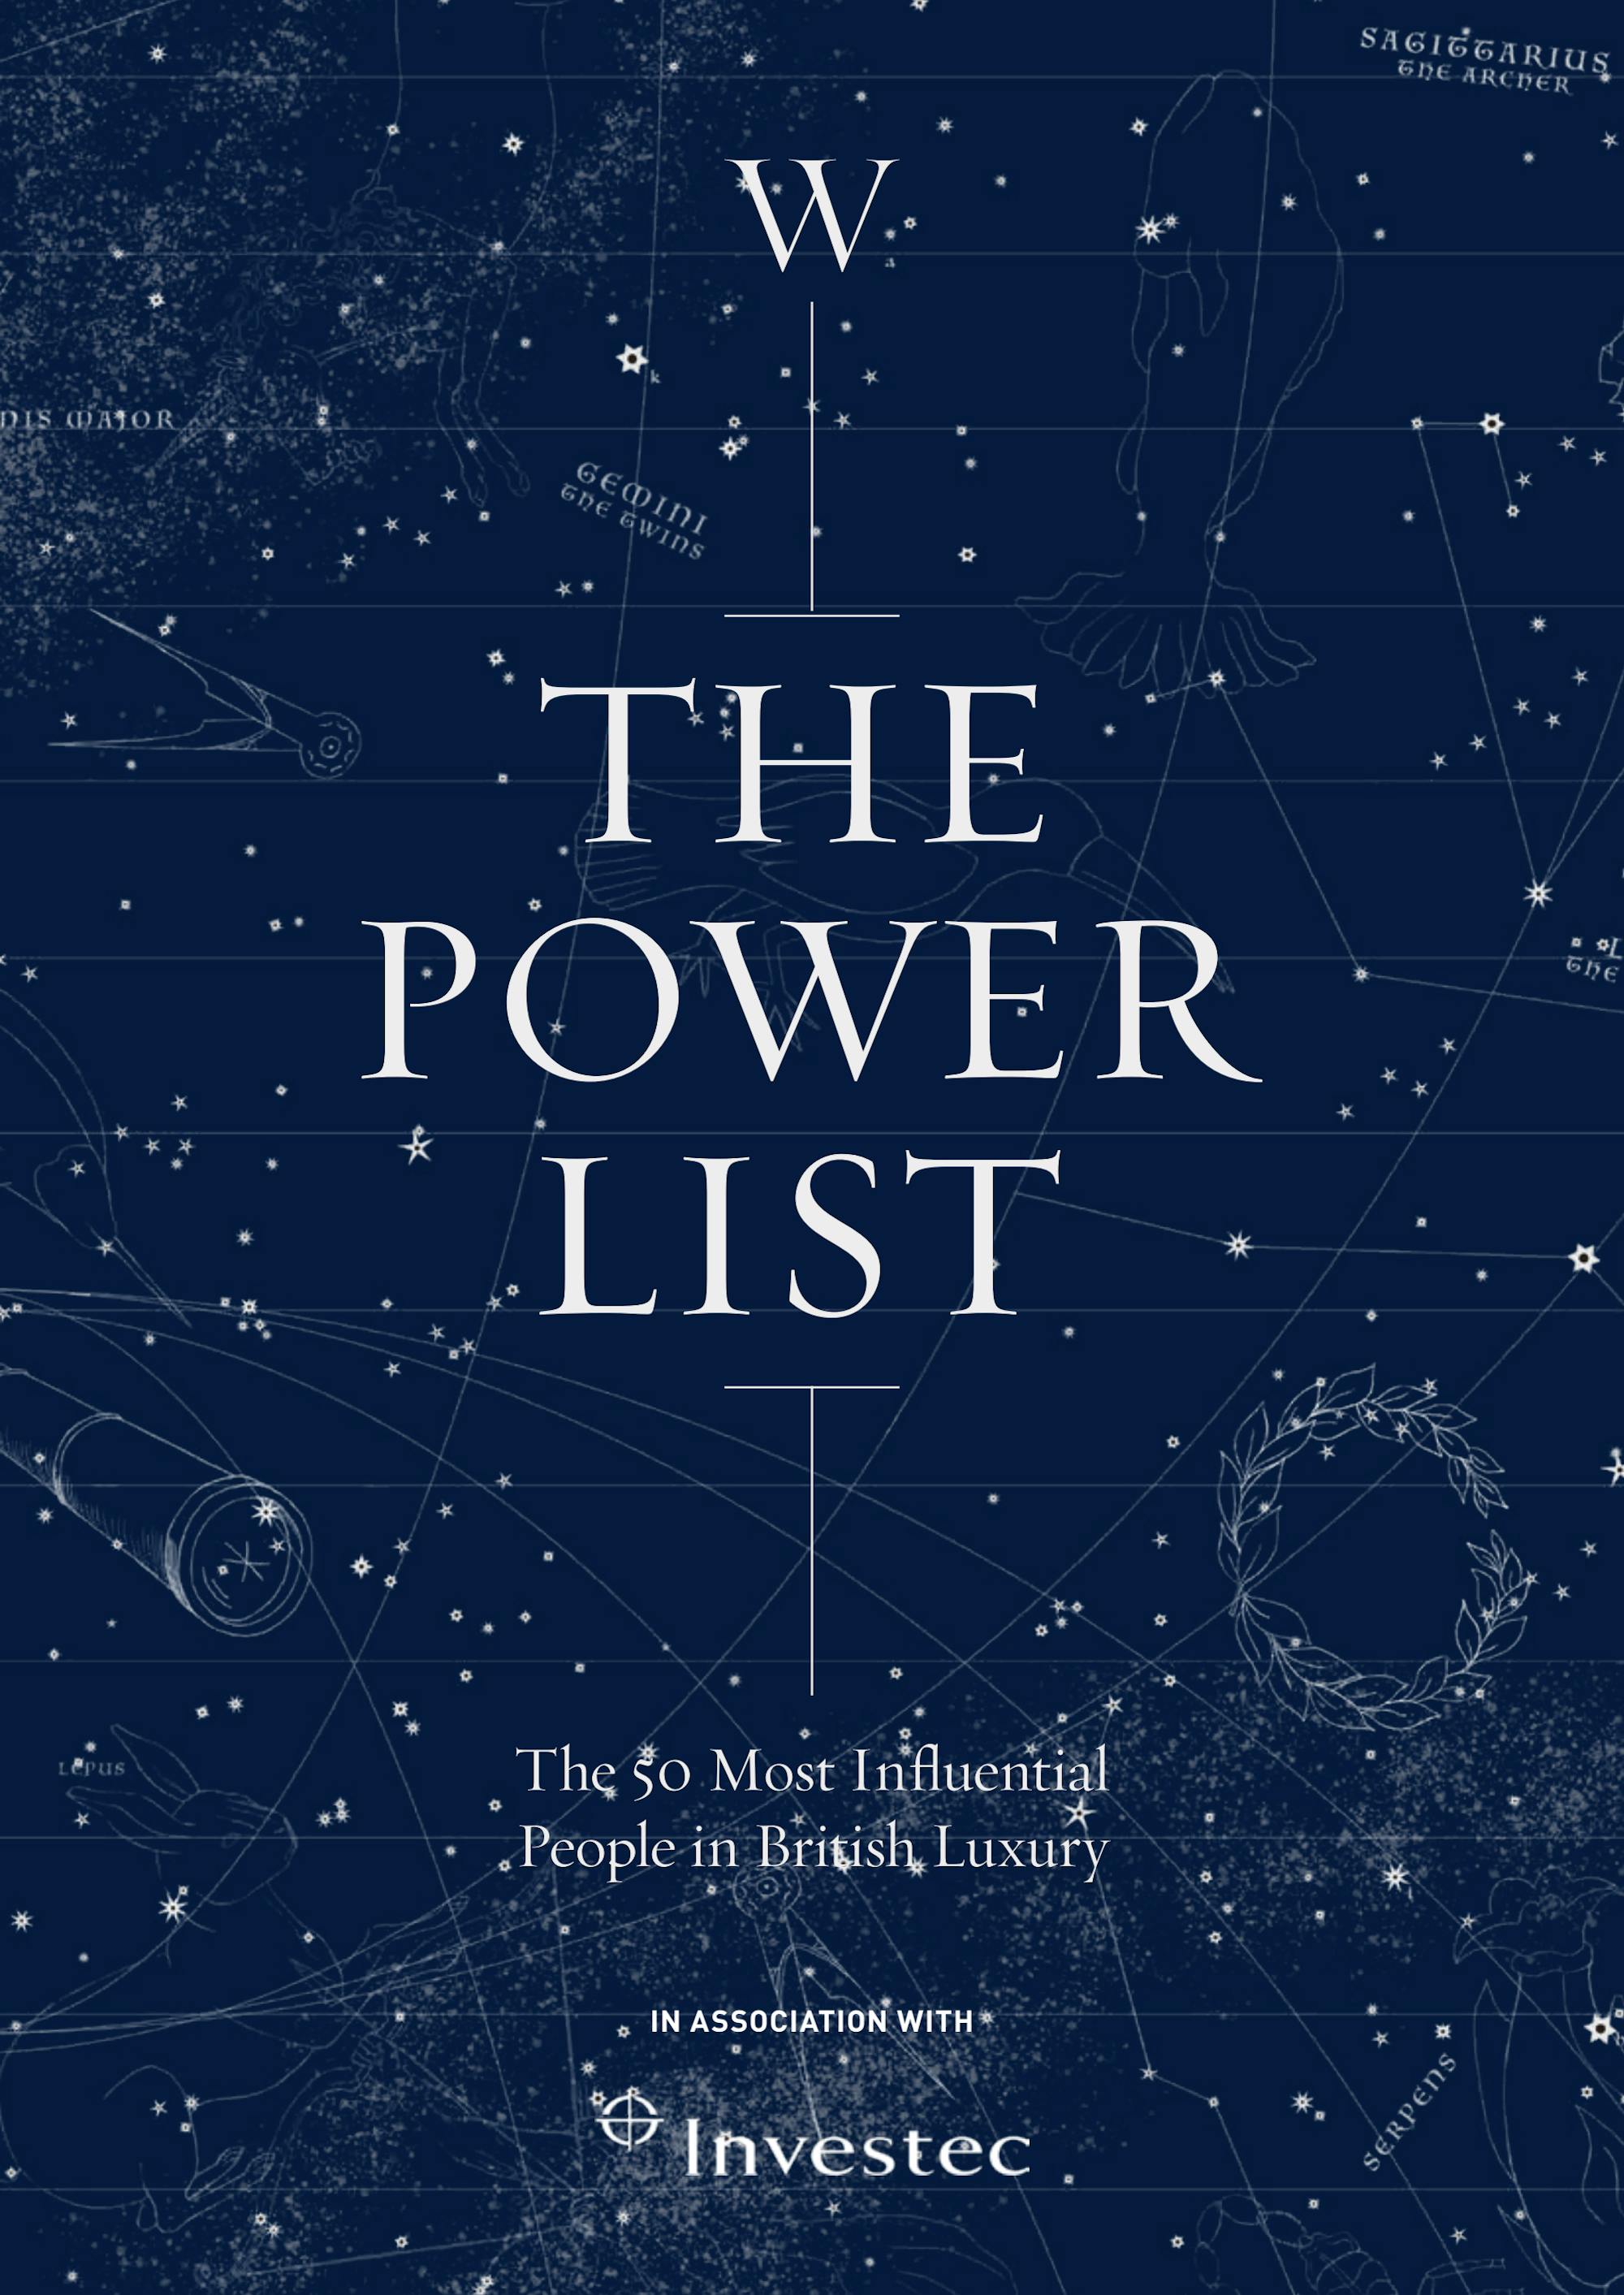 The Walpole Power List 2020 The 50 Most Influential People in British Luxury 